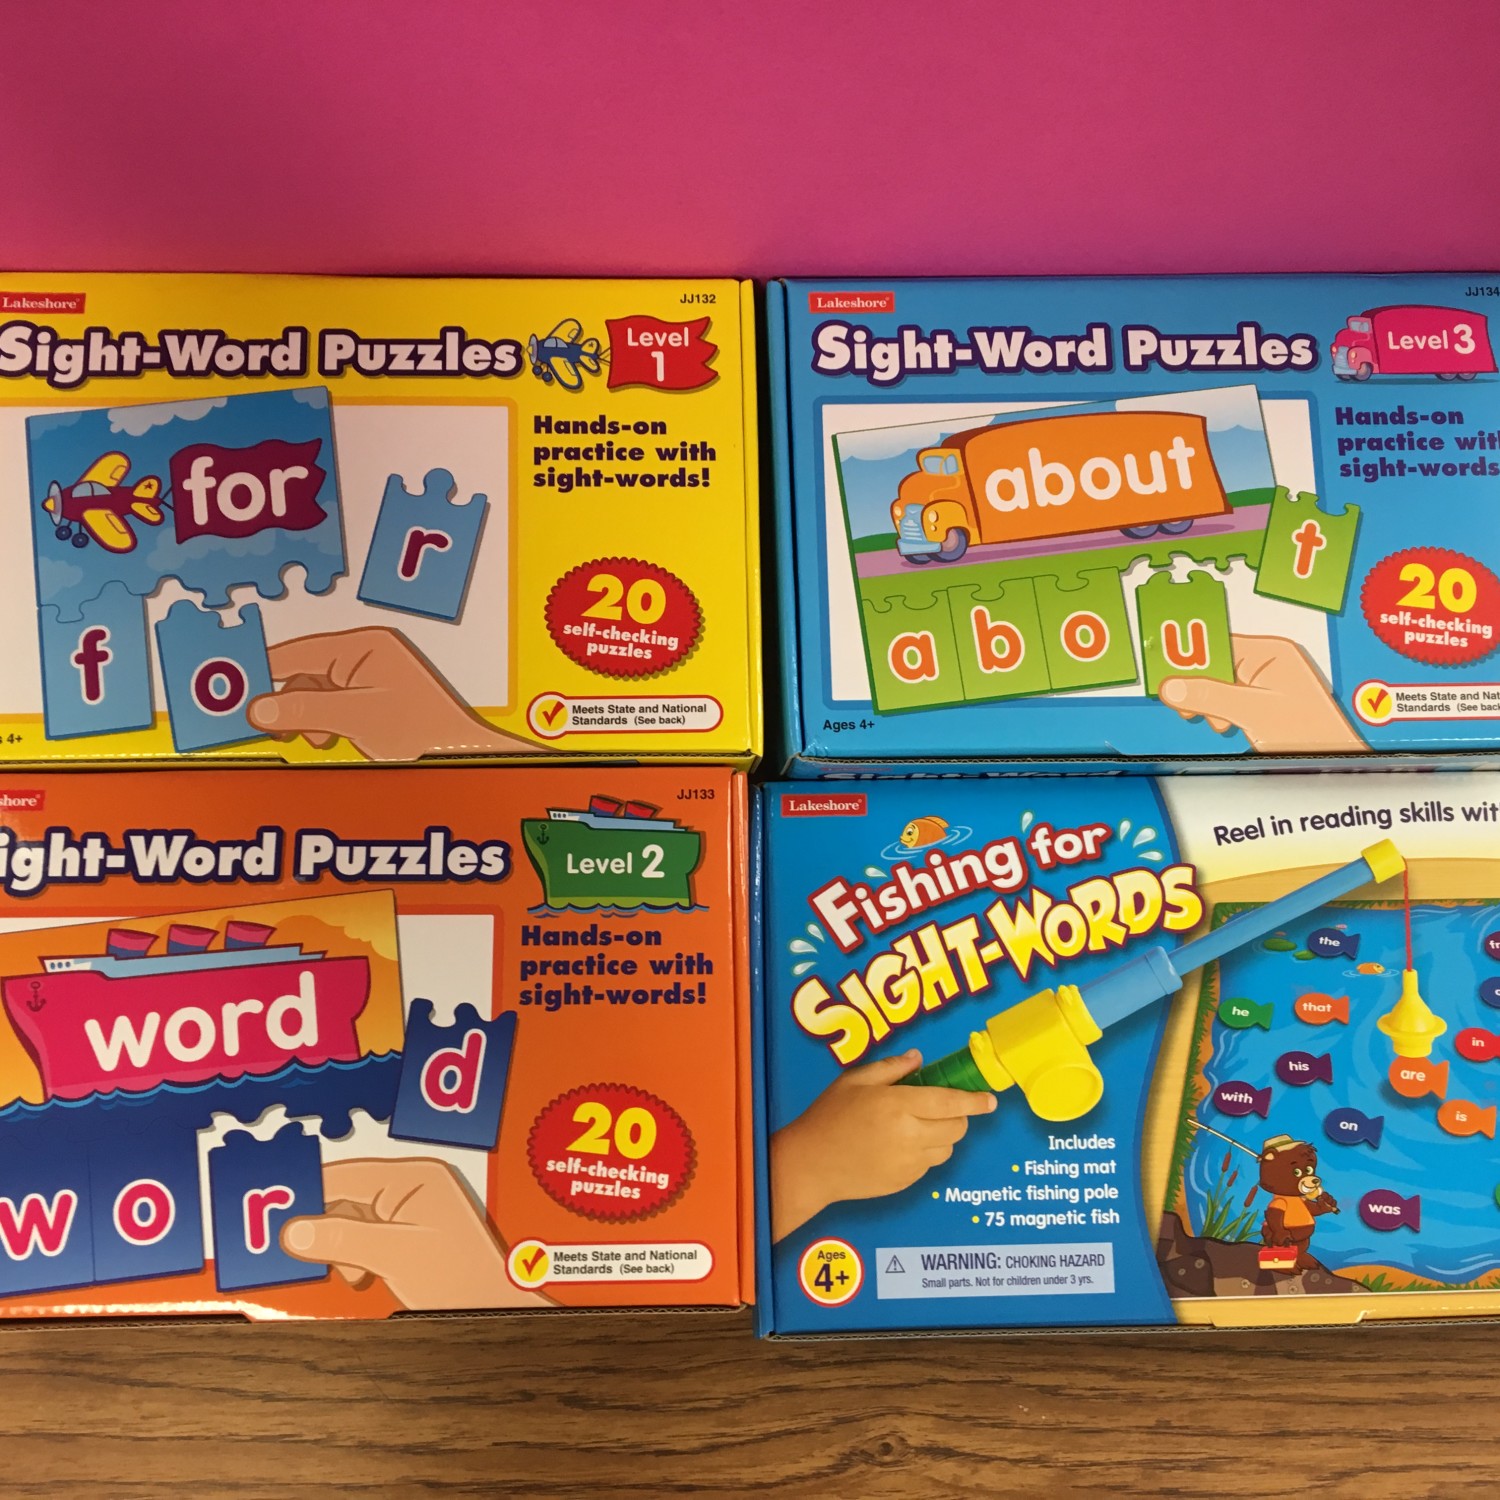 Sight word puzzles levels 1,2,3 and fishing for sight words